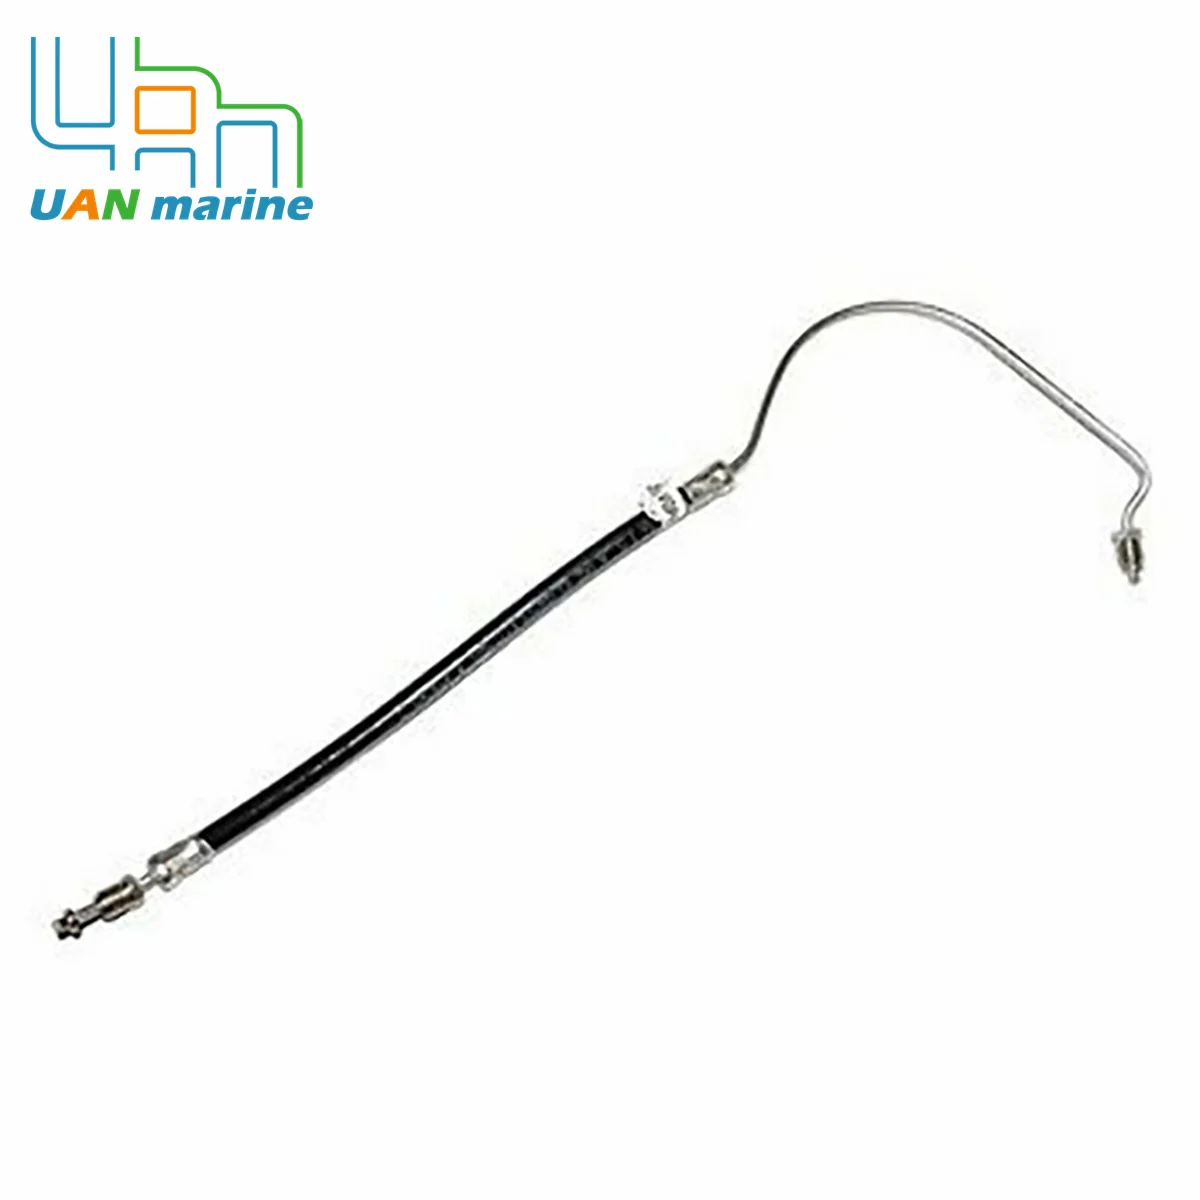 Hydraulic Trim Hose OMC Volvo SX-M Port Down with Fore Connections 1994-Up  3857523 sorghum 513782 eletric power master window control switch with pannel for mazda 323f 1994 1998 513782 lhd front left driver side